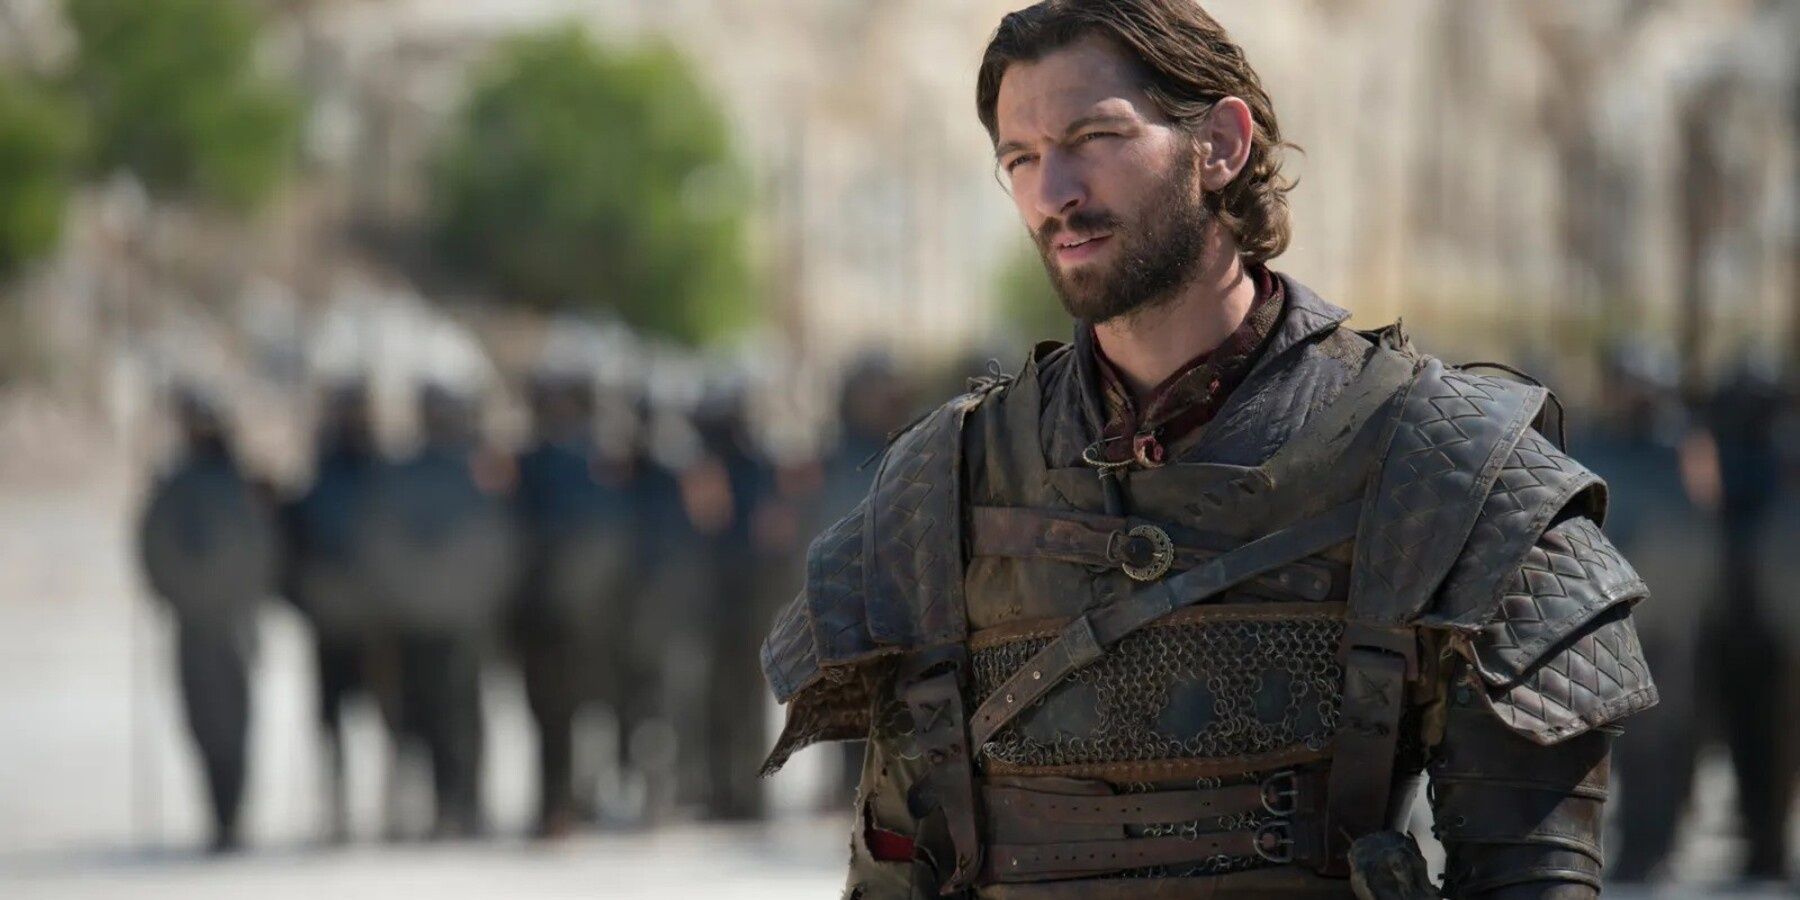 Daario Naharis stand in front of the Unsullied